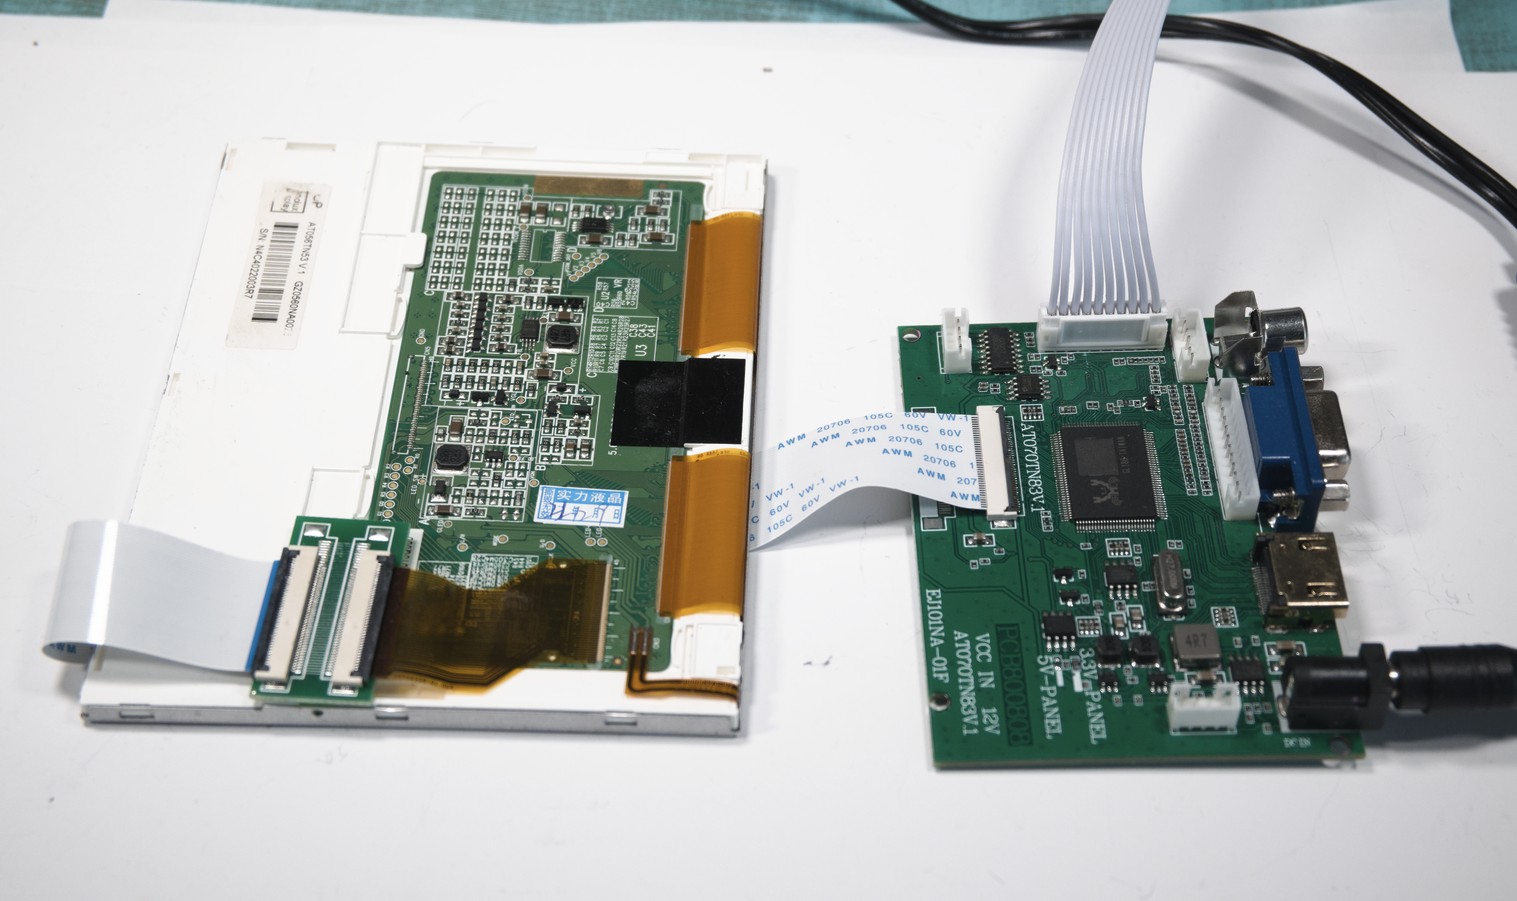 The LCD panel is backed by white plastic, and has a small PCB attached with a ribbon cable. The ribbon cable connects to the controller PCB, which has connectors for video input and power.